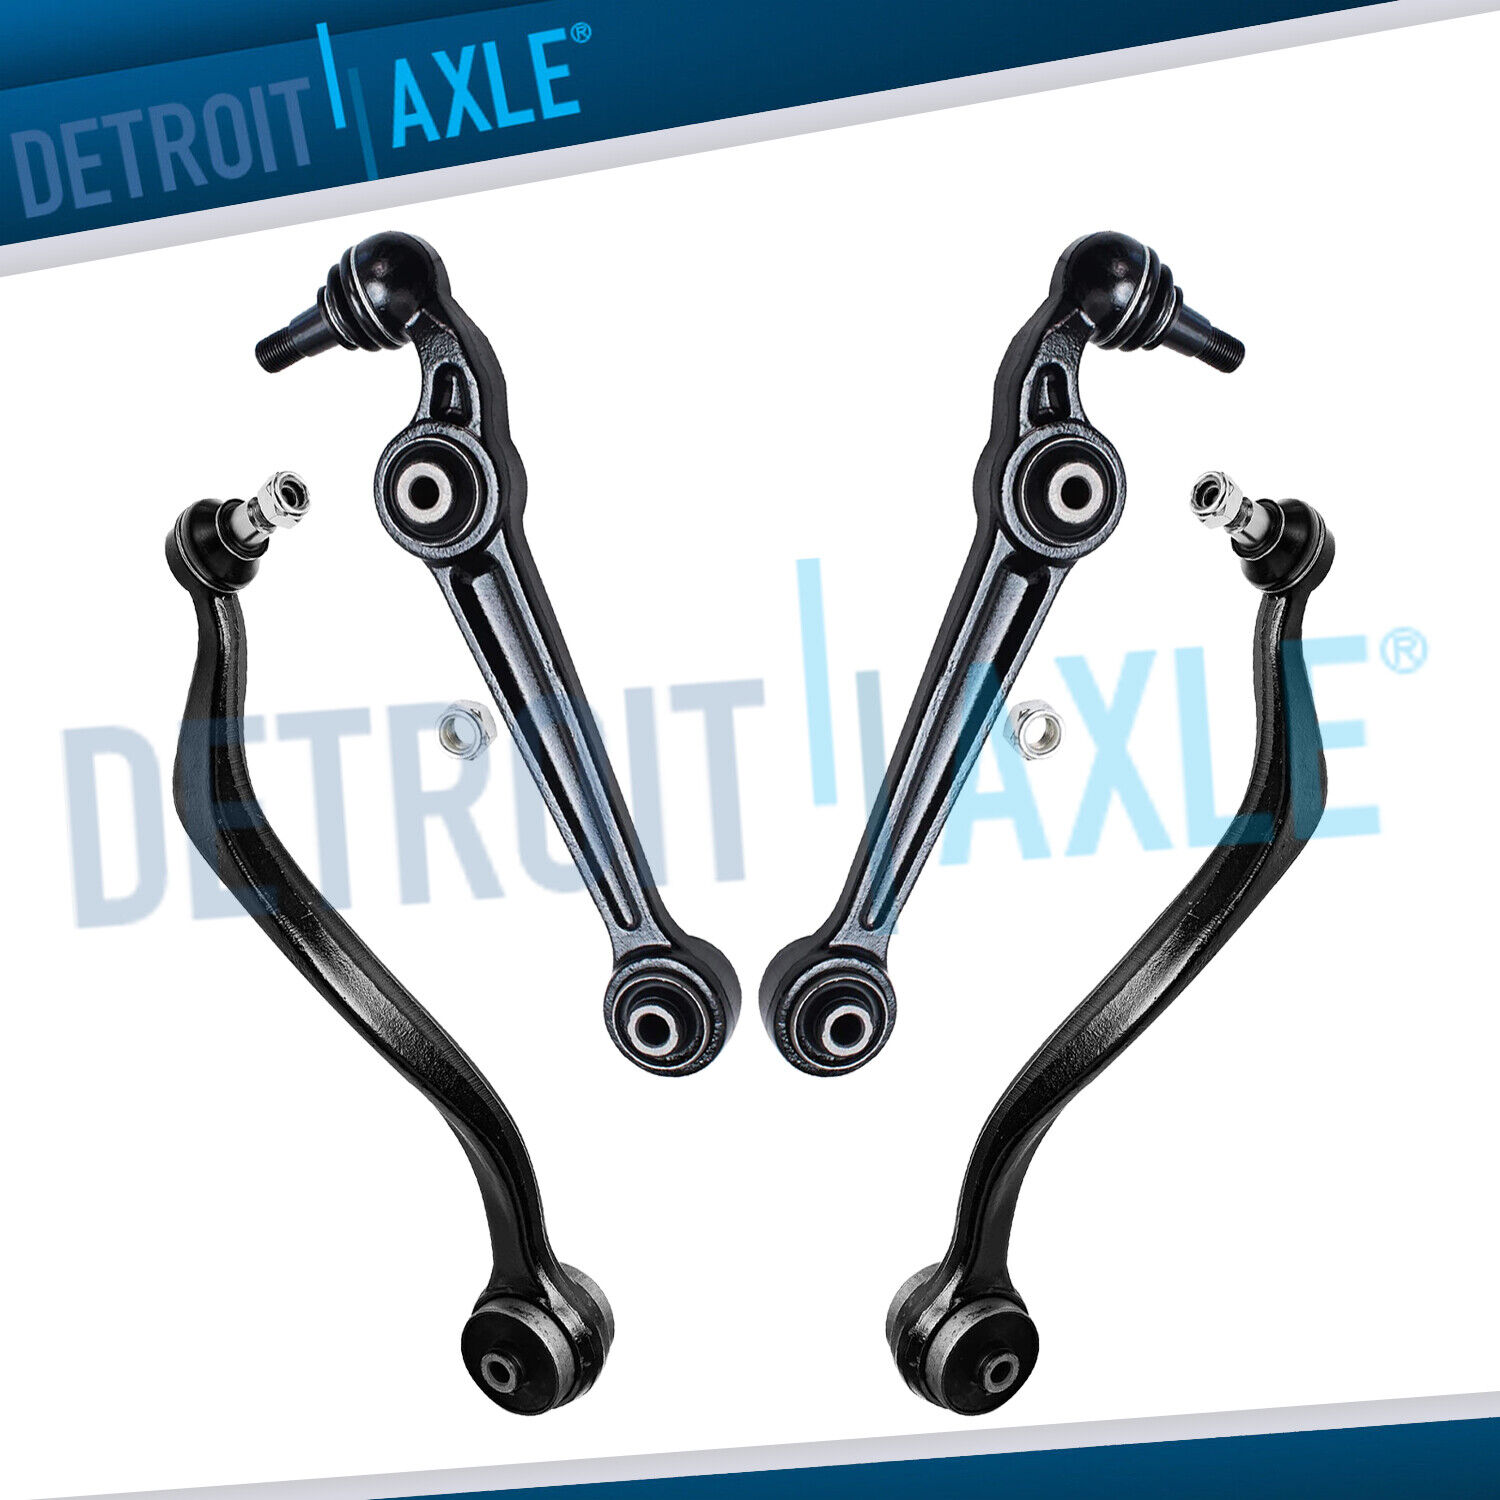 4 Front Lower Control Arms with Ball Joints for 2006 Ford Fusion Zephyr Mazda 6